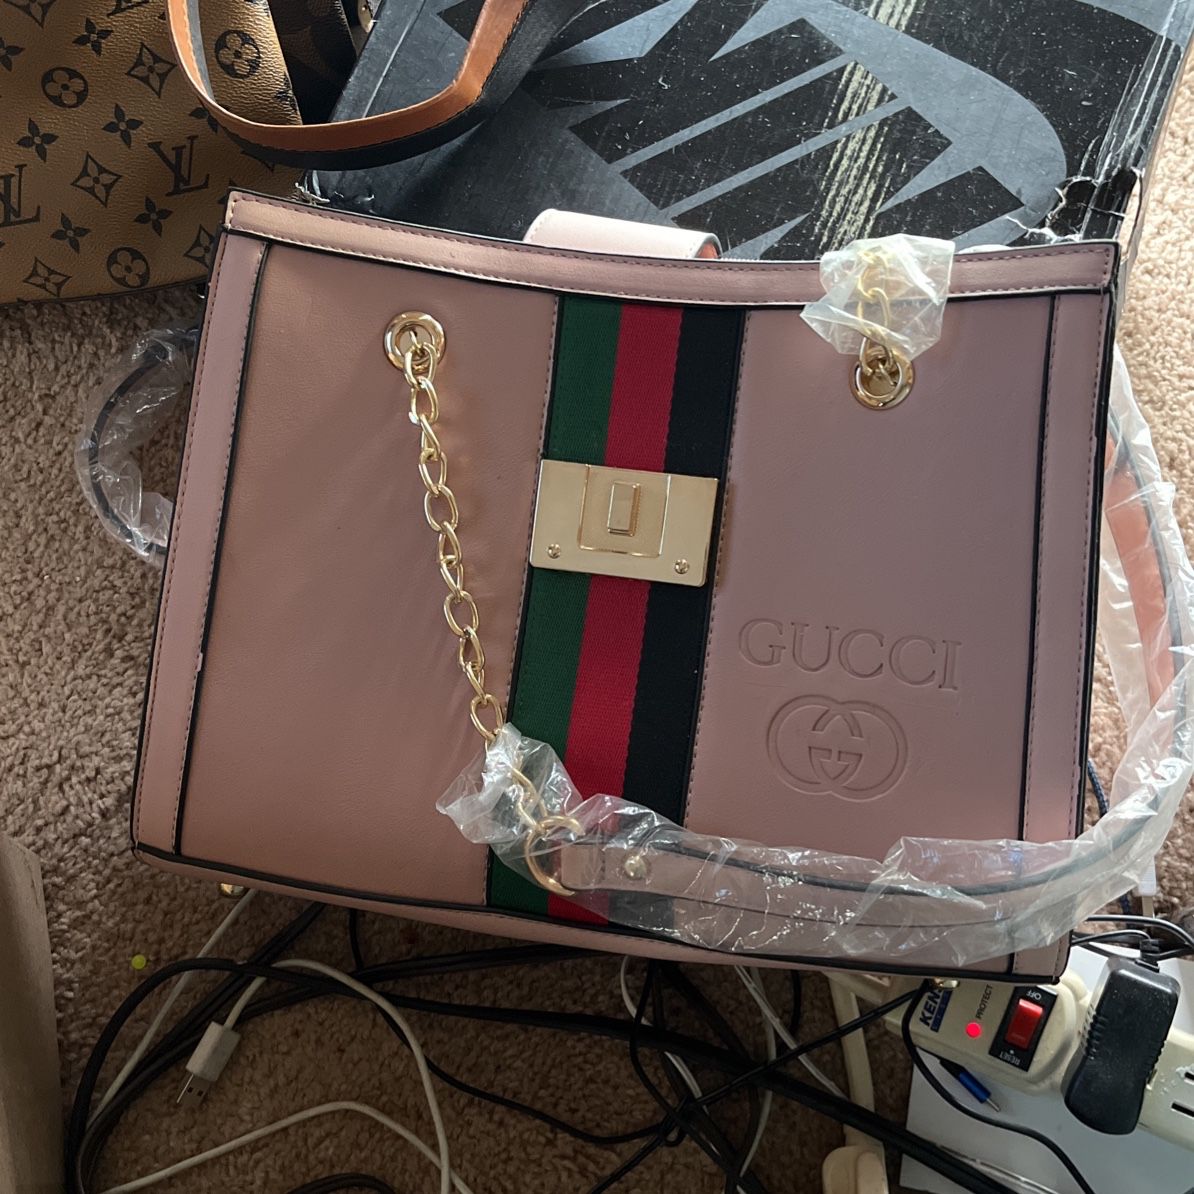 Gucci And Louie V Purses for Sale in Lawrence, IN - OfferUp